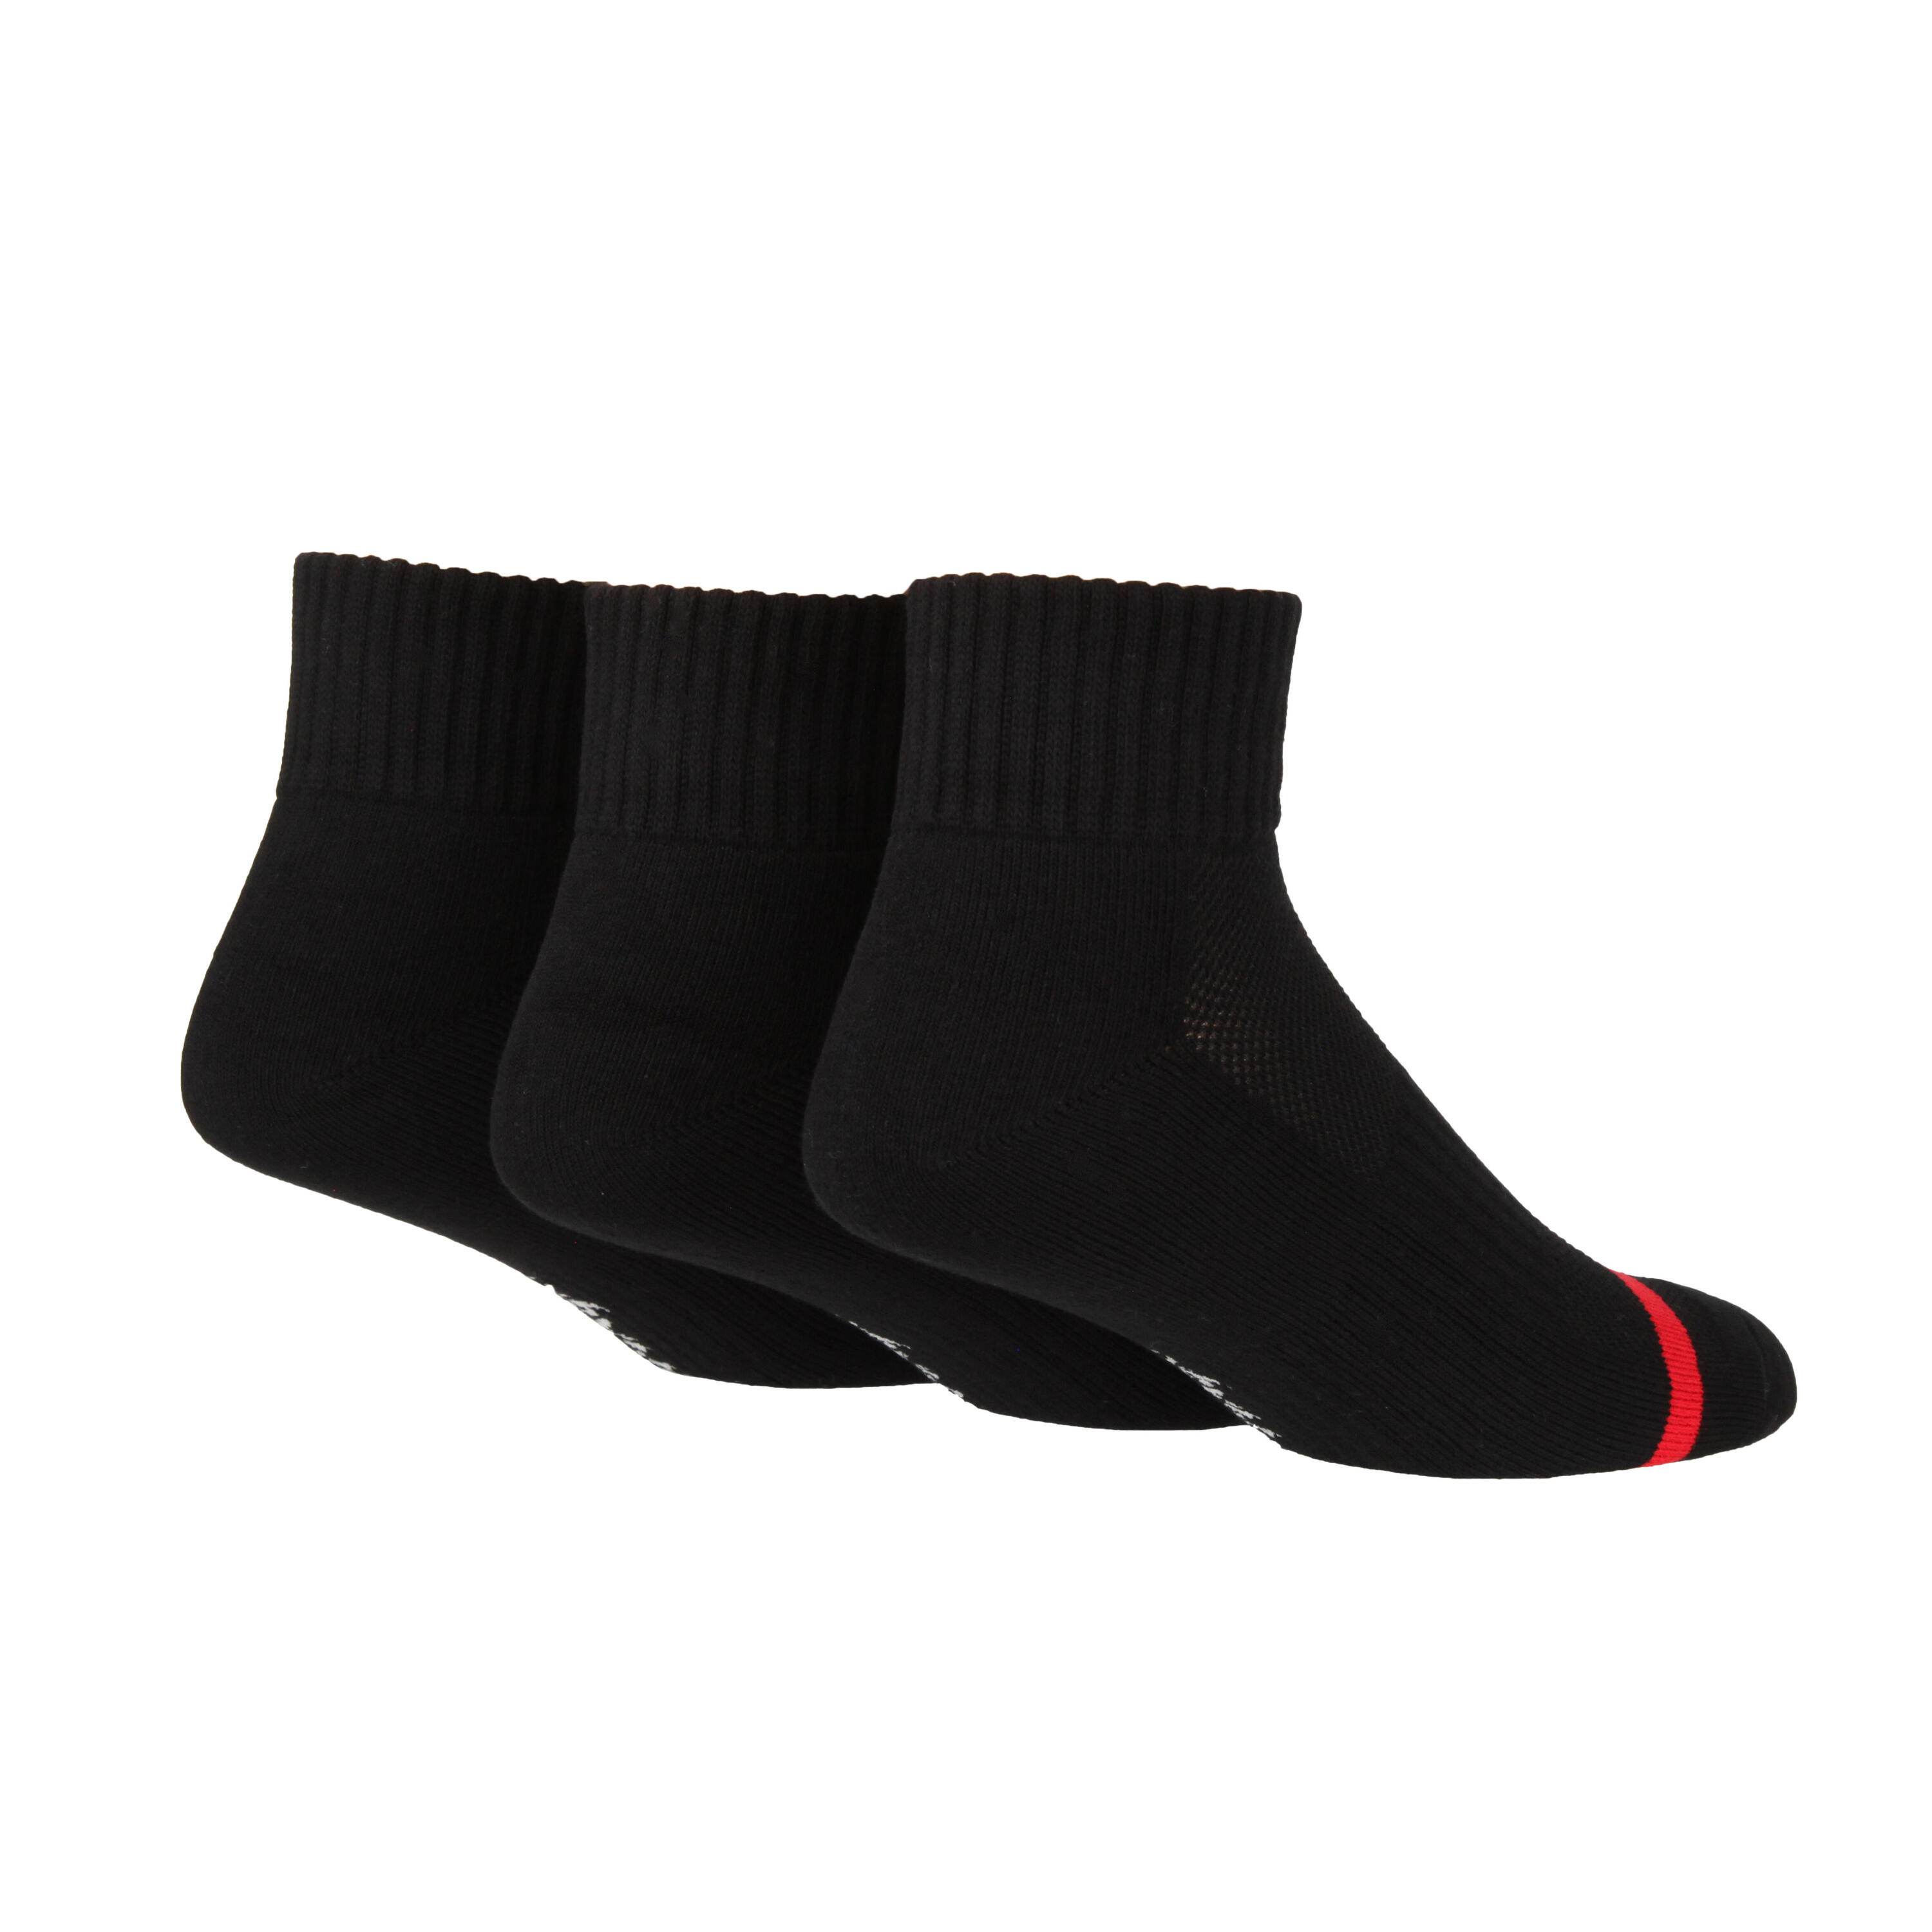 PRINGLE OF SCOTLAND Mens Quarter Length Sports Socks with Half Cushioned Foot and Arch Support Black